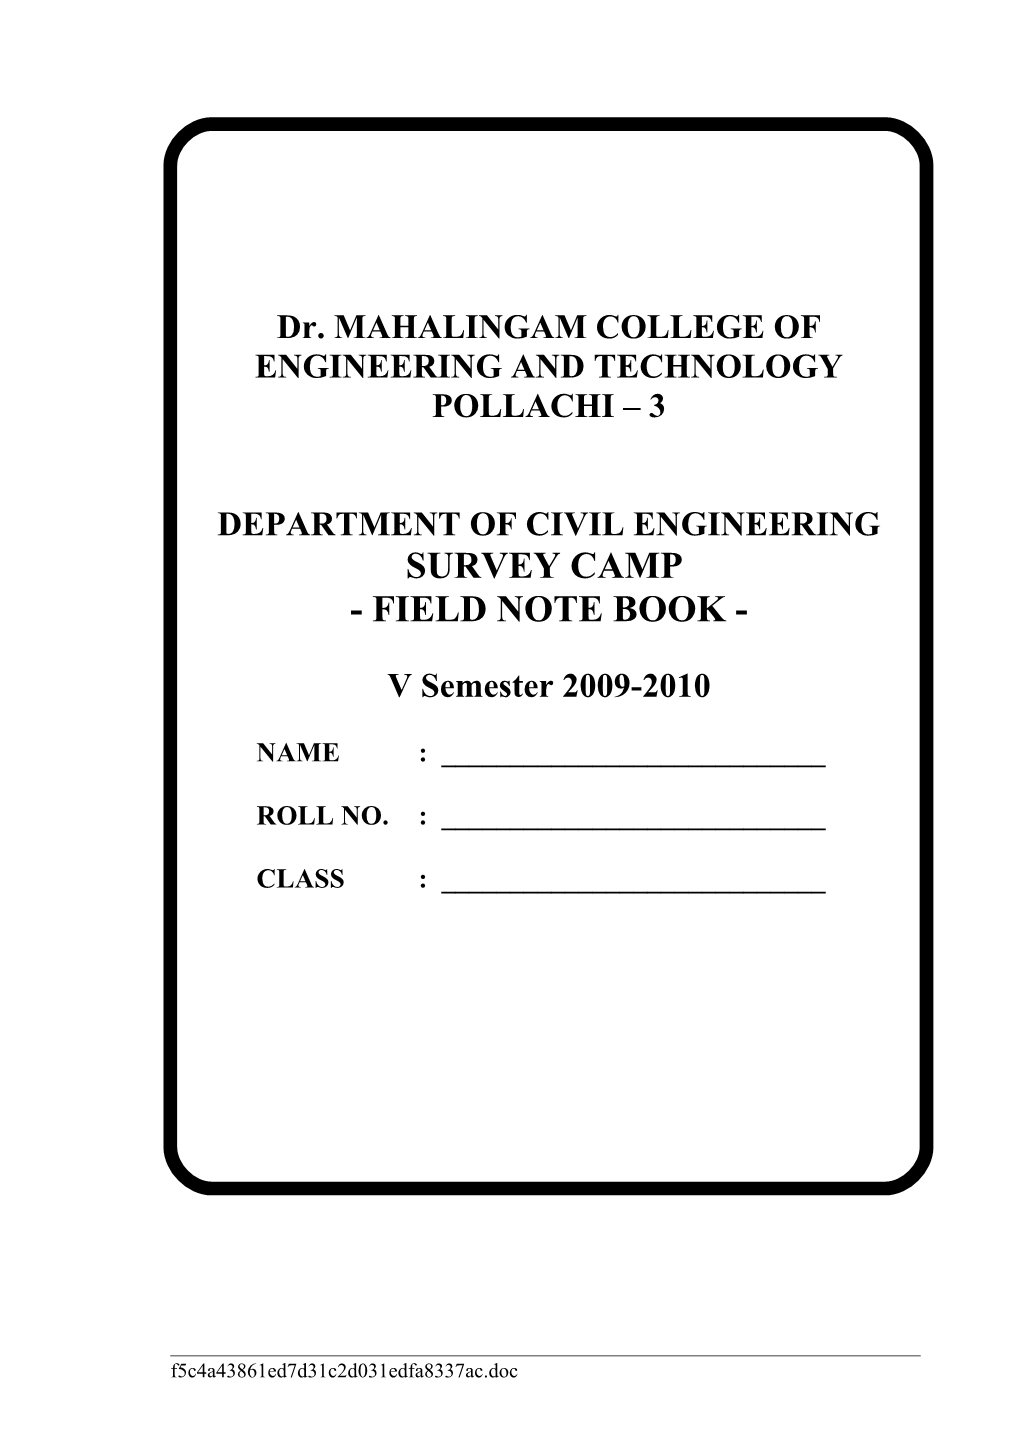 Dr. Mahalingam College of Engineering and Technology, Pollachi 642 003